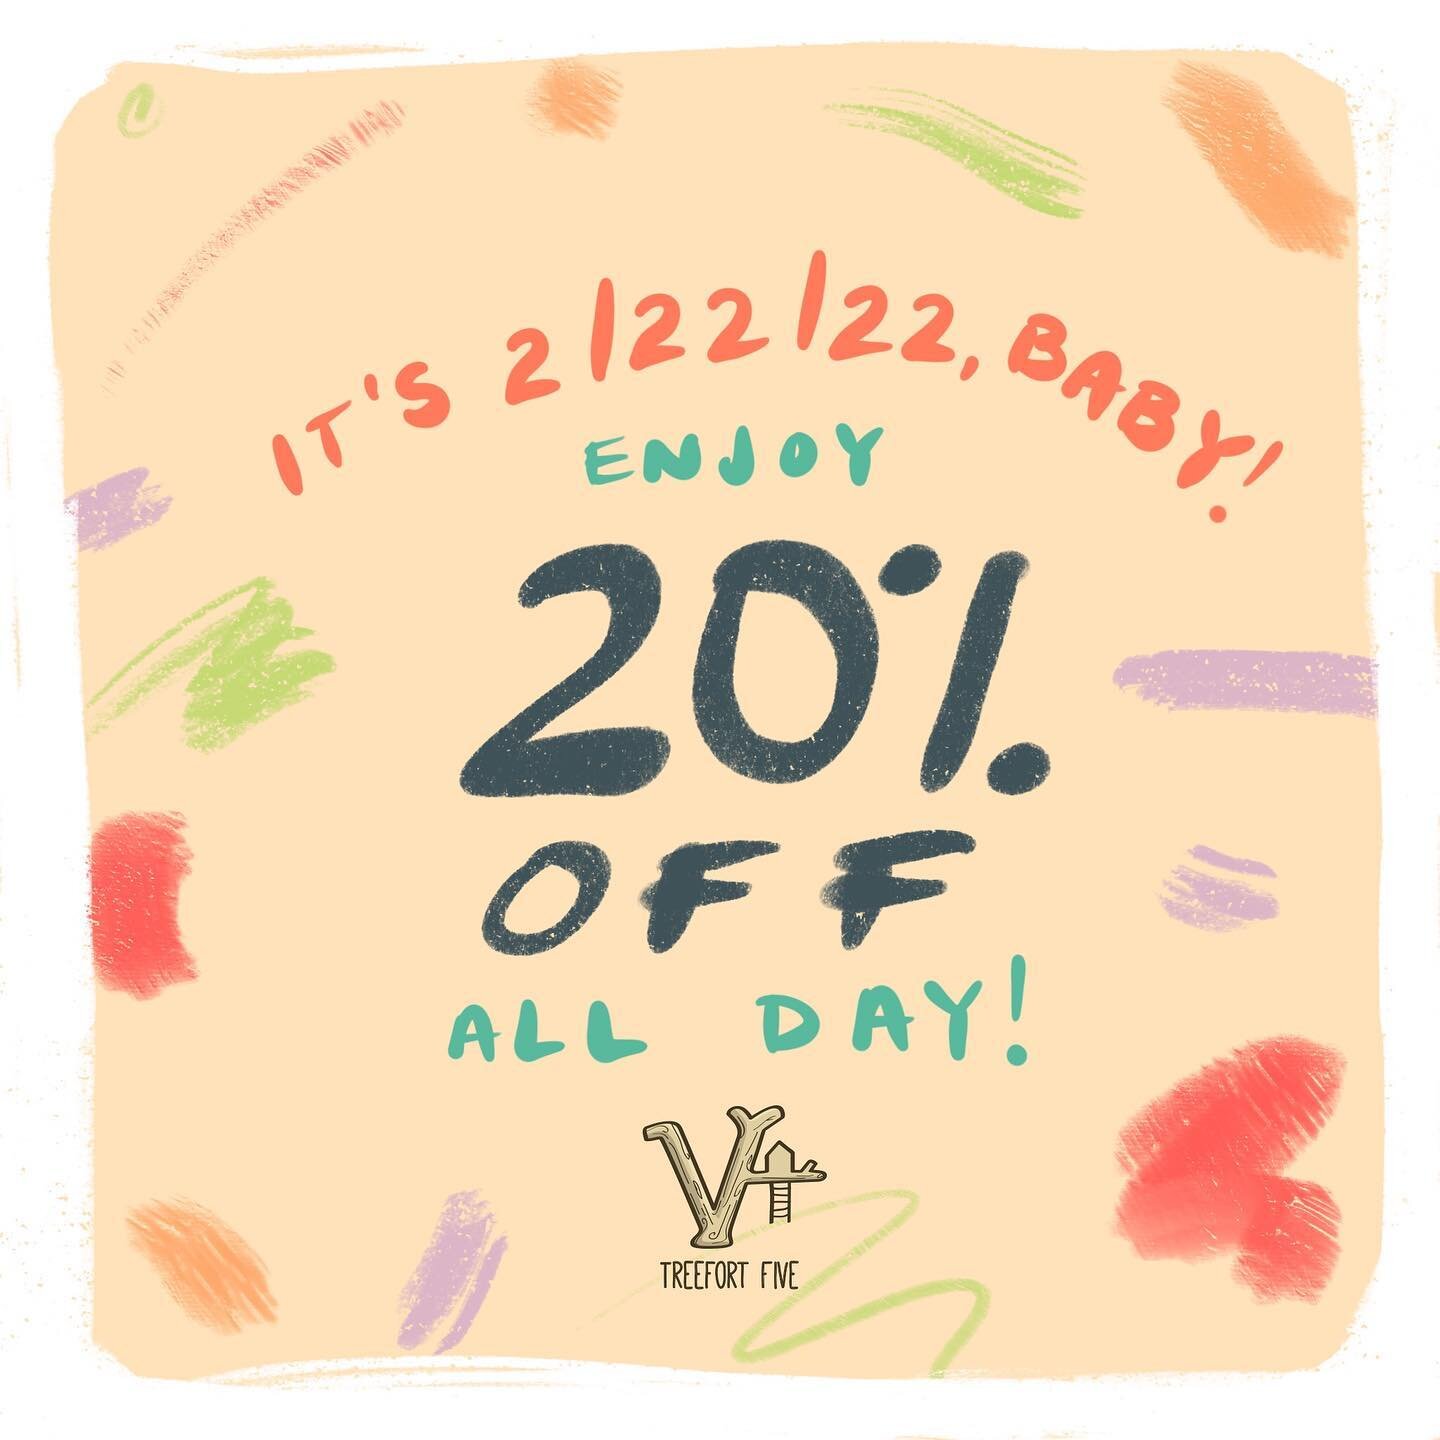 It&rsquo;s a one-day sale! It&rsquo;s 2/22/22 so all in-stock items are 20% off today!

Swipe to take a peek at a few items still available. Shop link is in my bio!

(&ldquo;Why not 22%, Danielle?&rdquo; Because Etsy doesn&rsquo;t offer custom percen